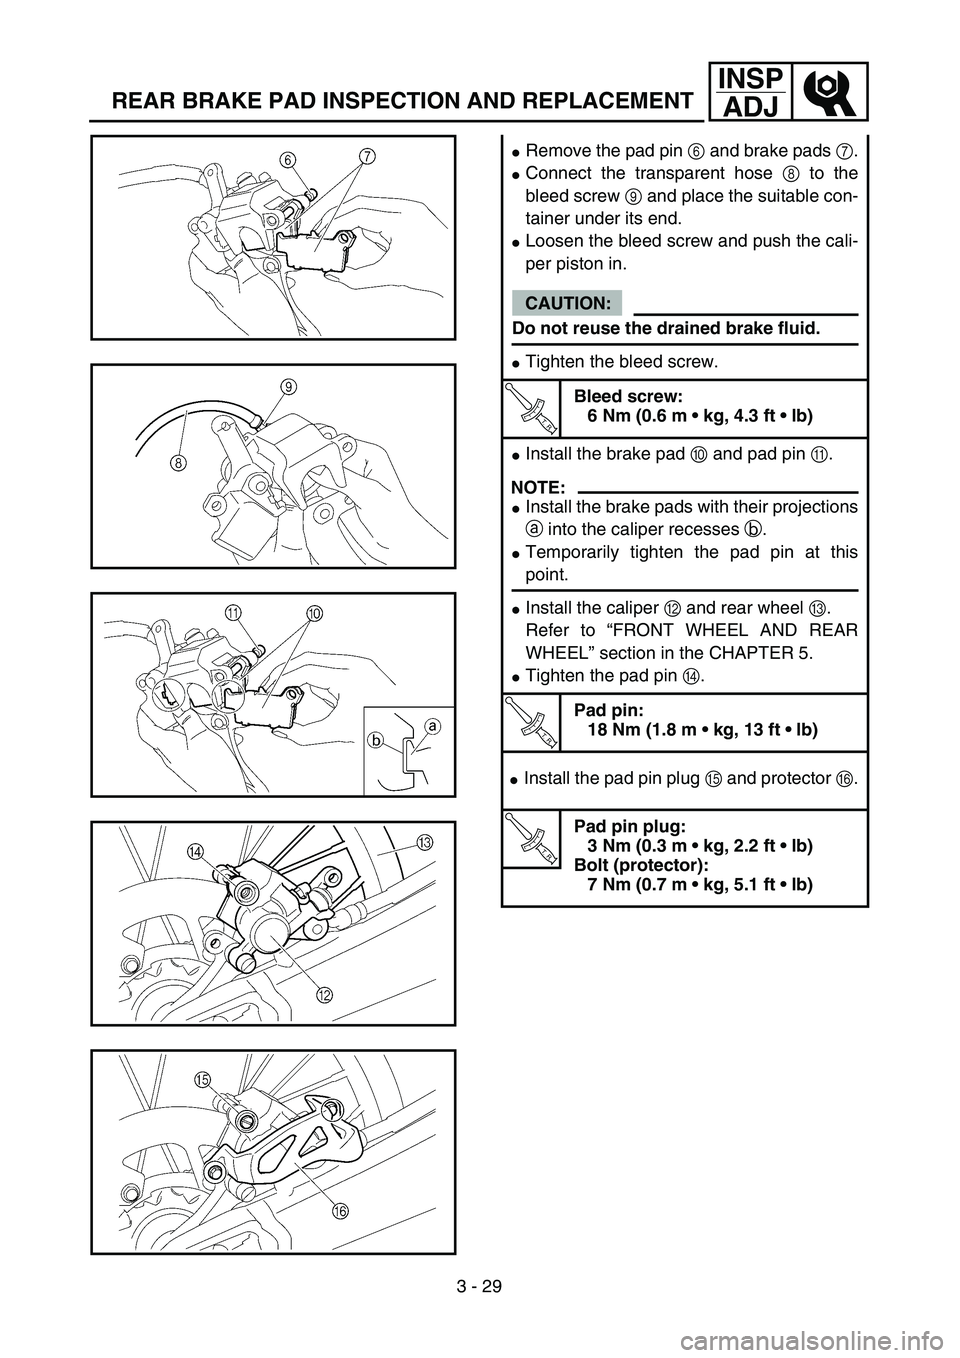 YAMAHA YZ450F 2004  Owners Manual 3 - 29
INSP
ADJ
REAR BRAKE PAD INSPECTION AND REPLACEMENT
Remove the pad pin 6 and brake pads 7.
Connect the transparent hose 8 to the
bleed screw 9 and place the suitable con-
tainer under its end.